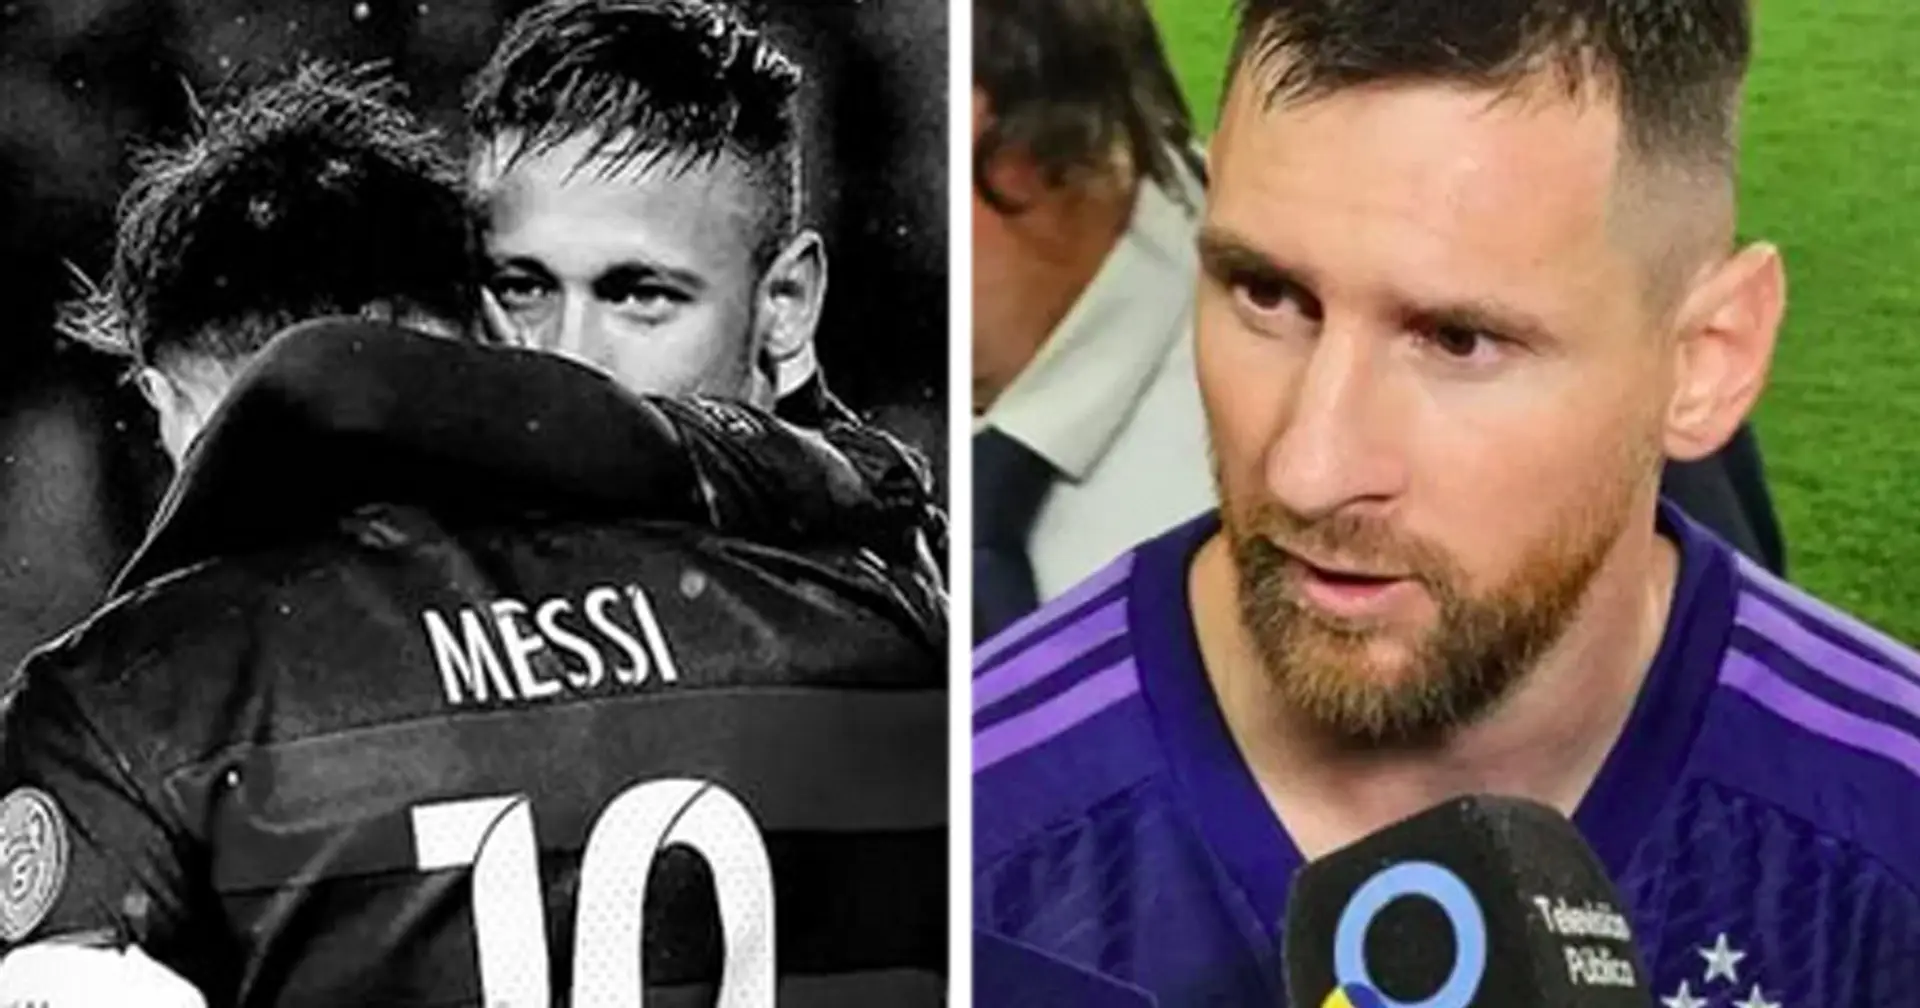 Messi sends message to Neymar amid potentially career-ending injury, adds pic from Barca days